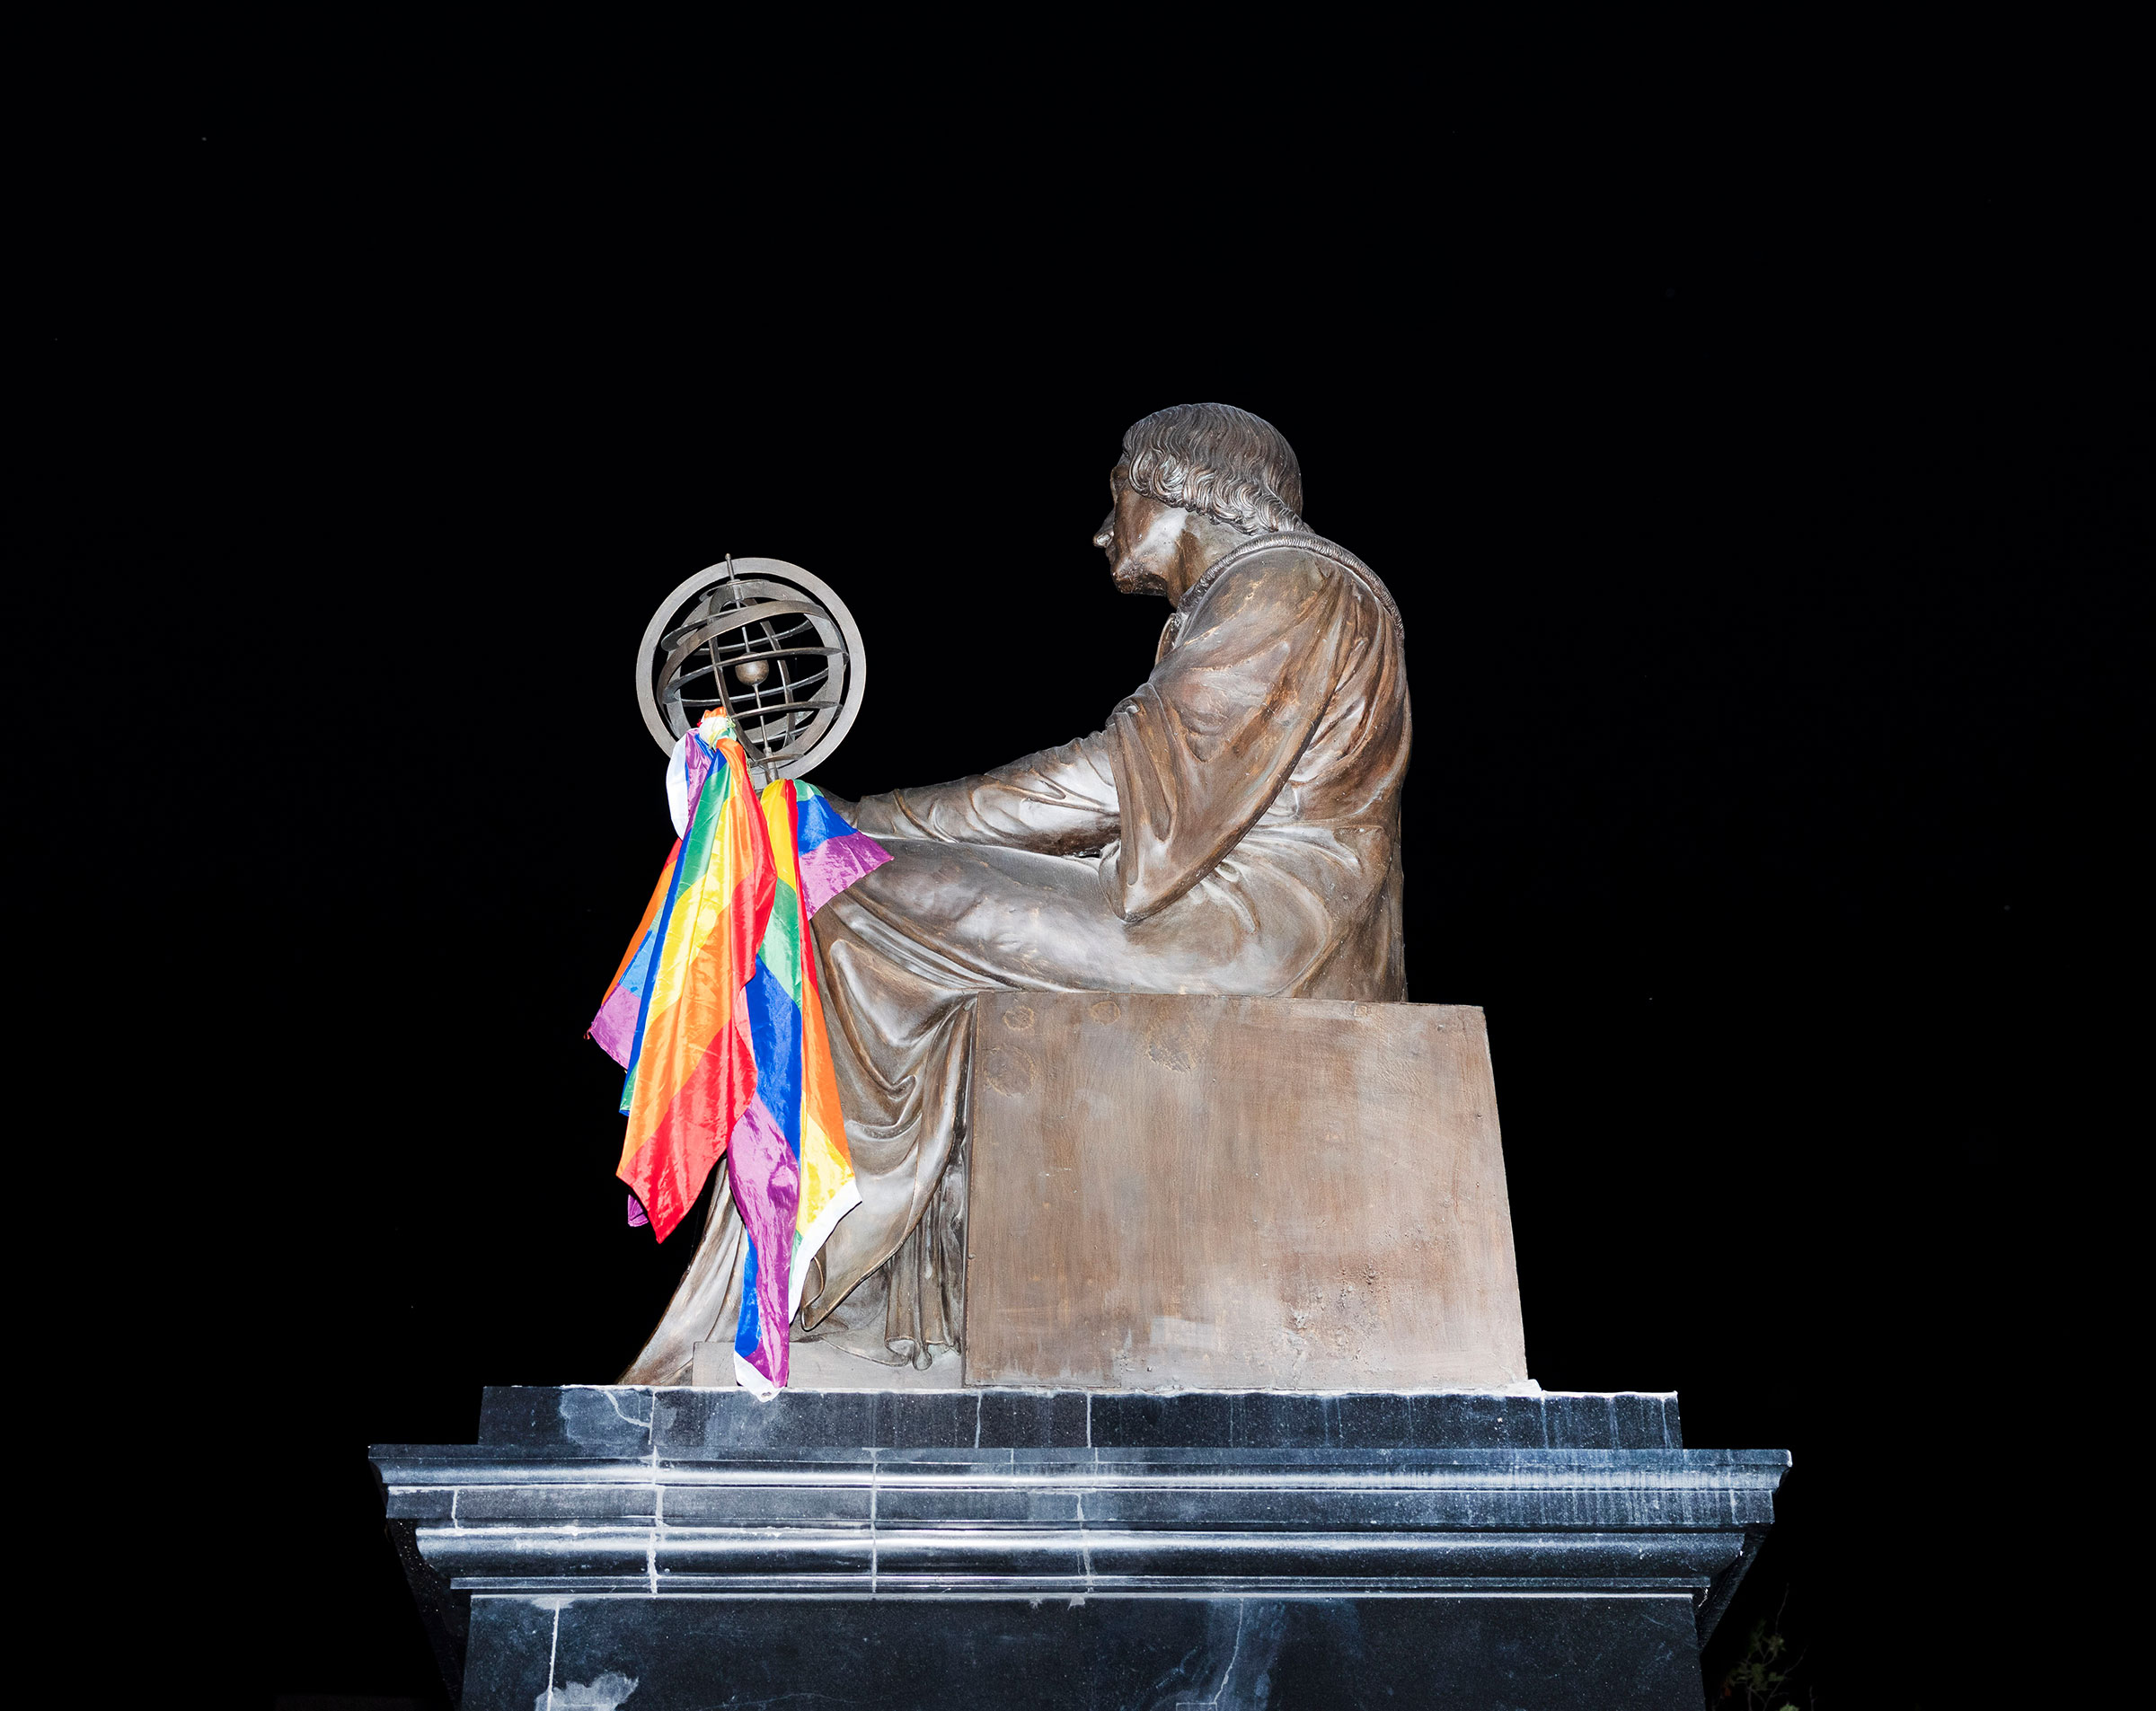 The Nicolaus Copernicus monument is decorated with a rainbow flag. (Rafal Milach—Magnum Photos)